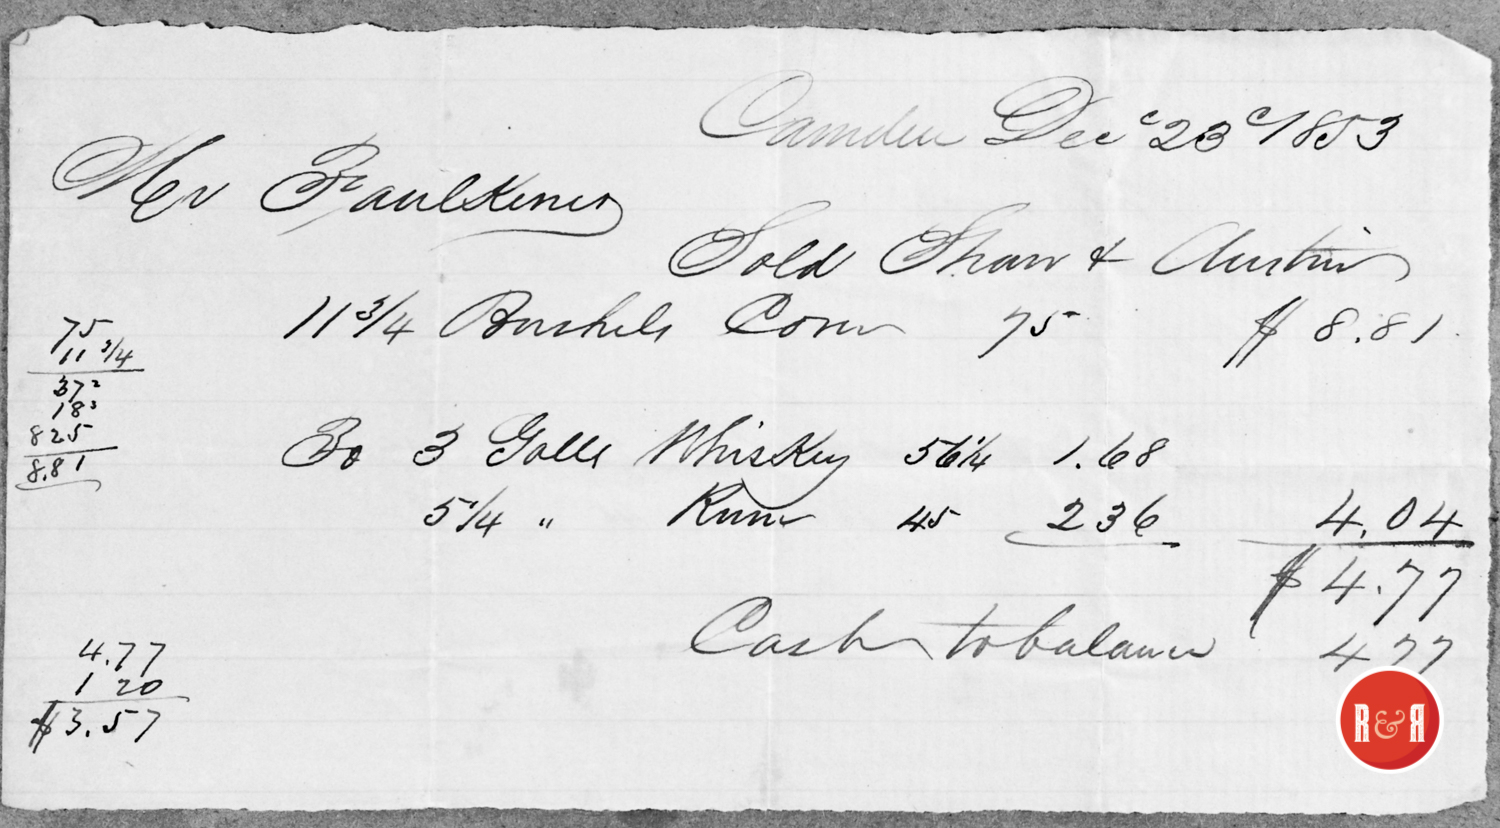 RECEIPT FROM SHAW AND AUSTIN OF CAMDEN, S.C. - 1853